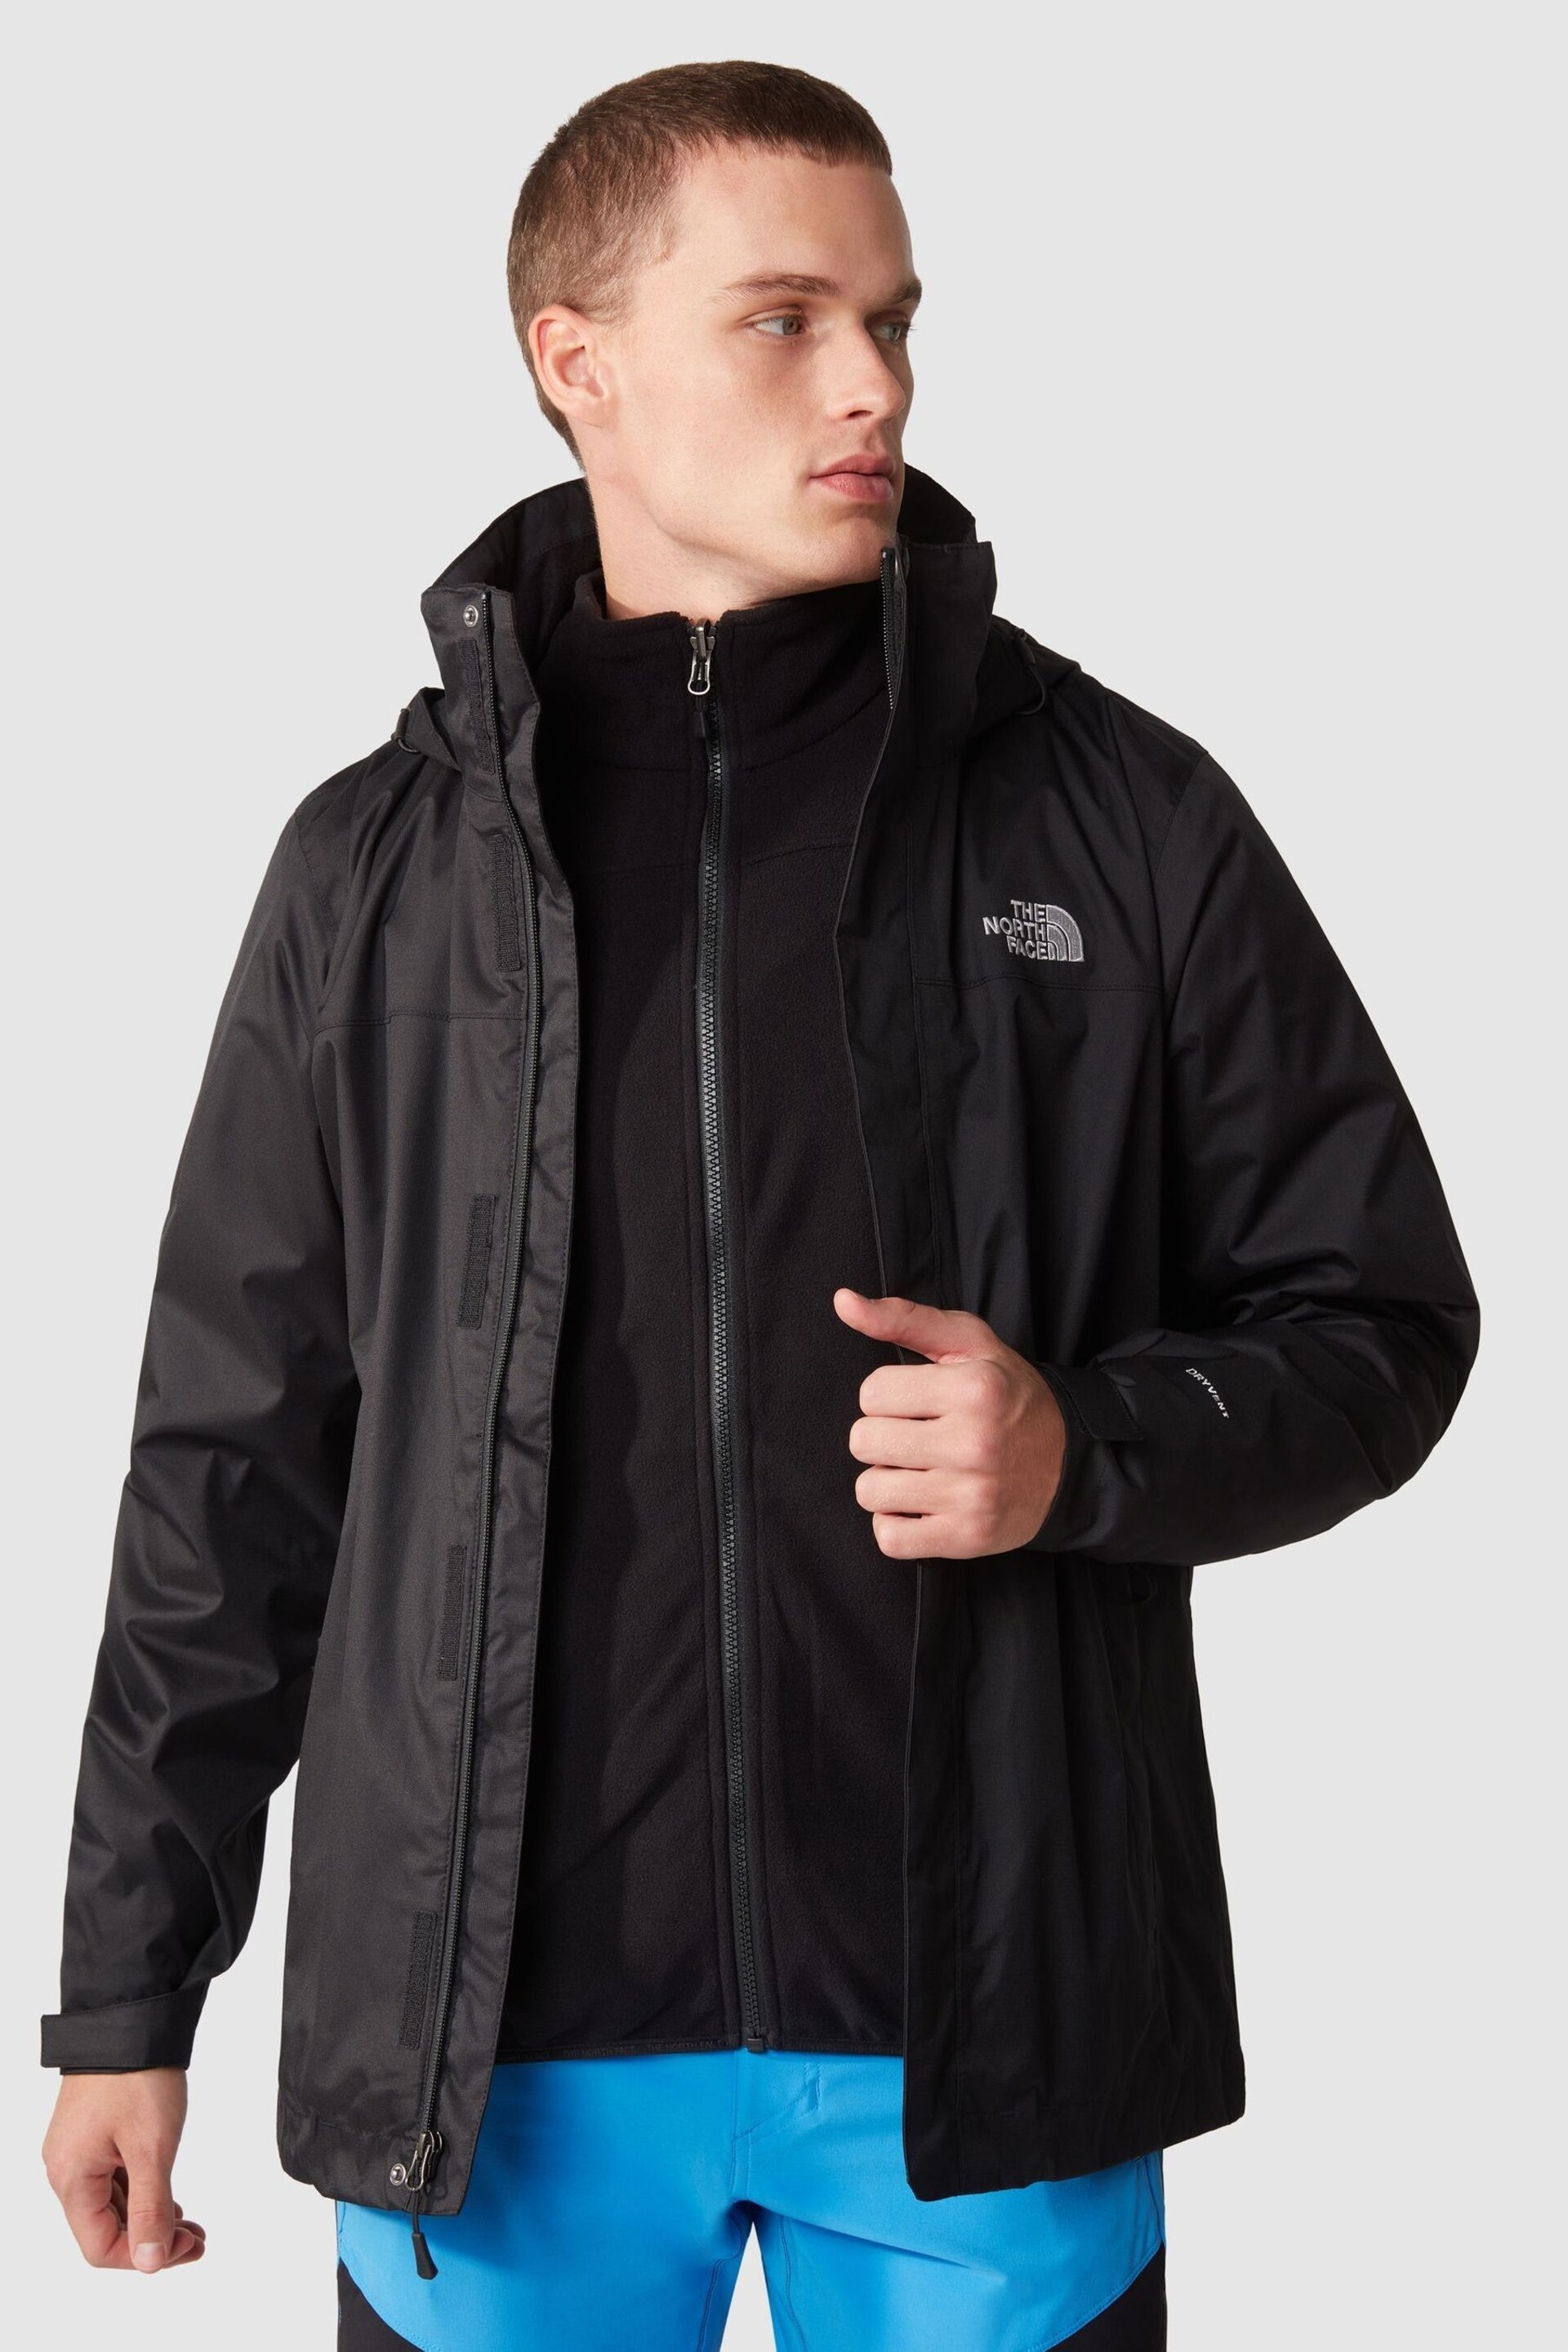 The North Face Black Evolve II Triclimate® Jacket - Image 4 of 7